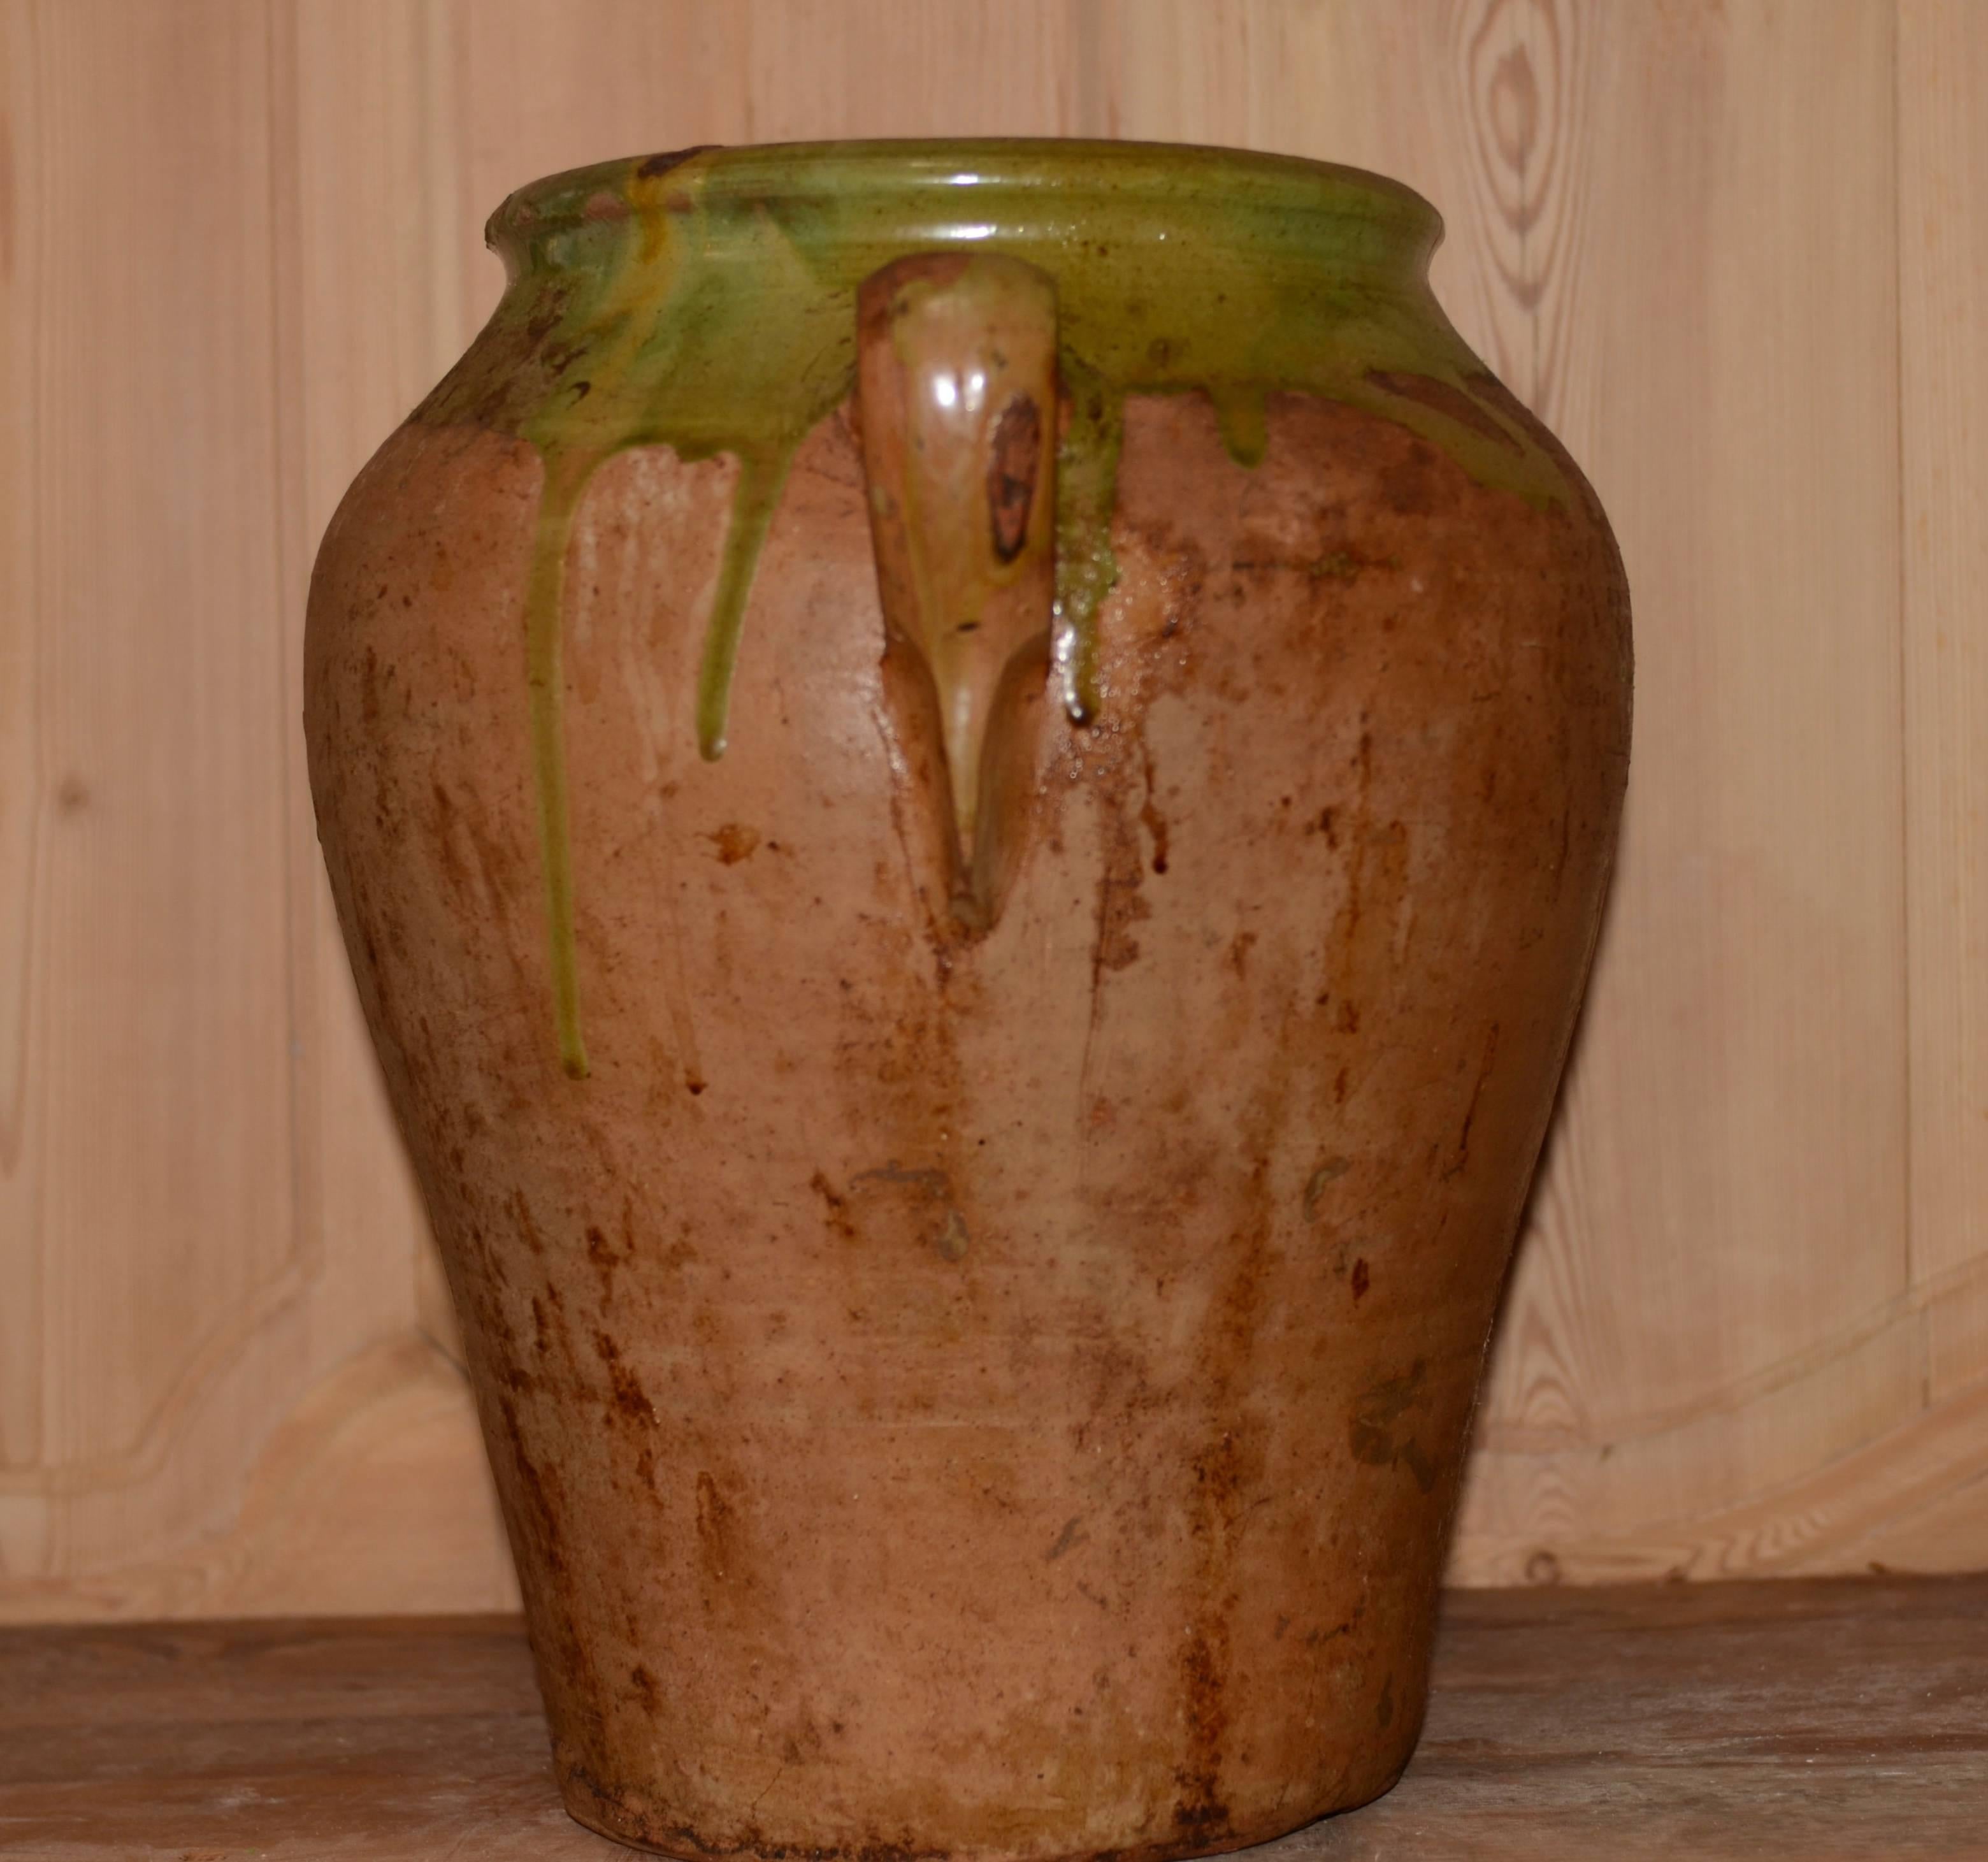 19th century French green glazed grand confit pot from Provence. Lovely aged glazed patina.